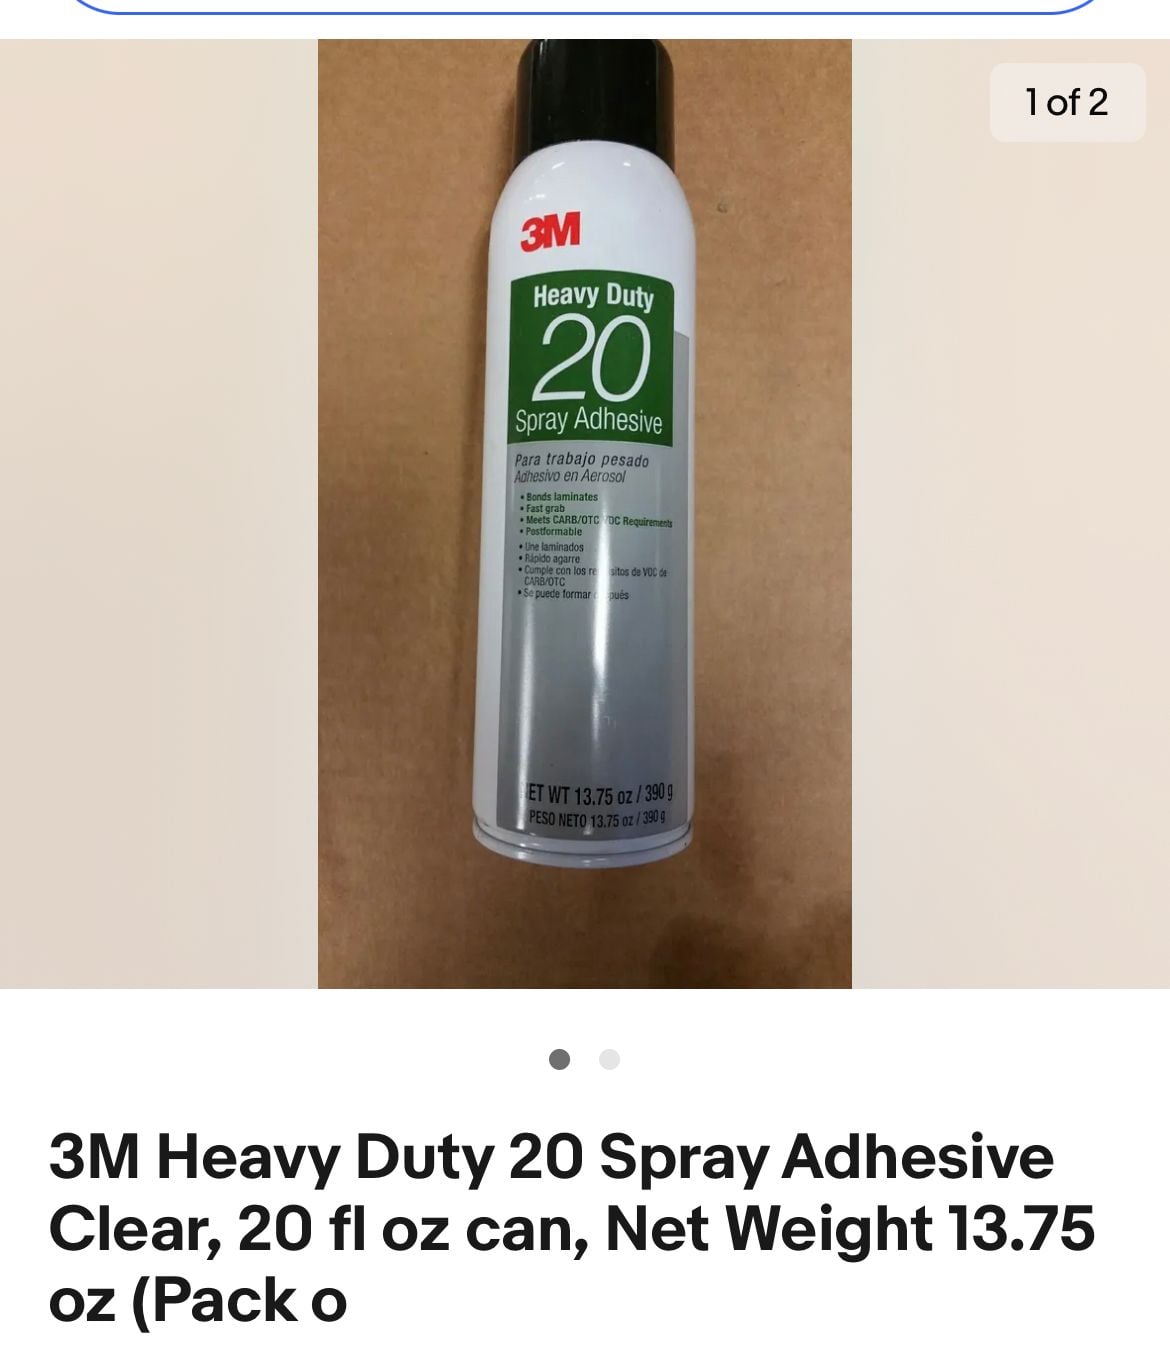 3M Heavy Duty 20 Spray Adhesive Clear, 20 fl oz can, Net Weight 13.75 oz  (Pack of 1)